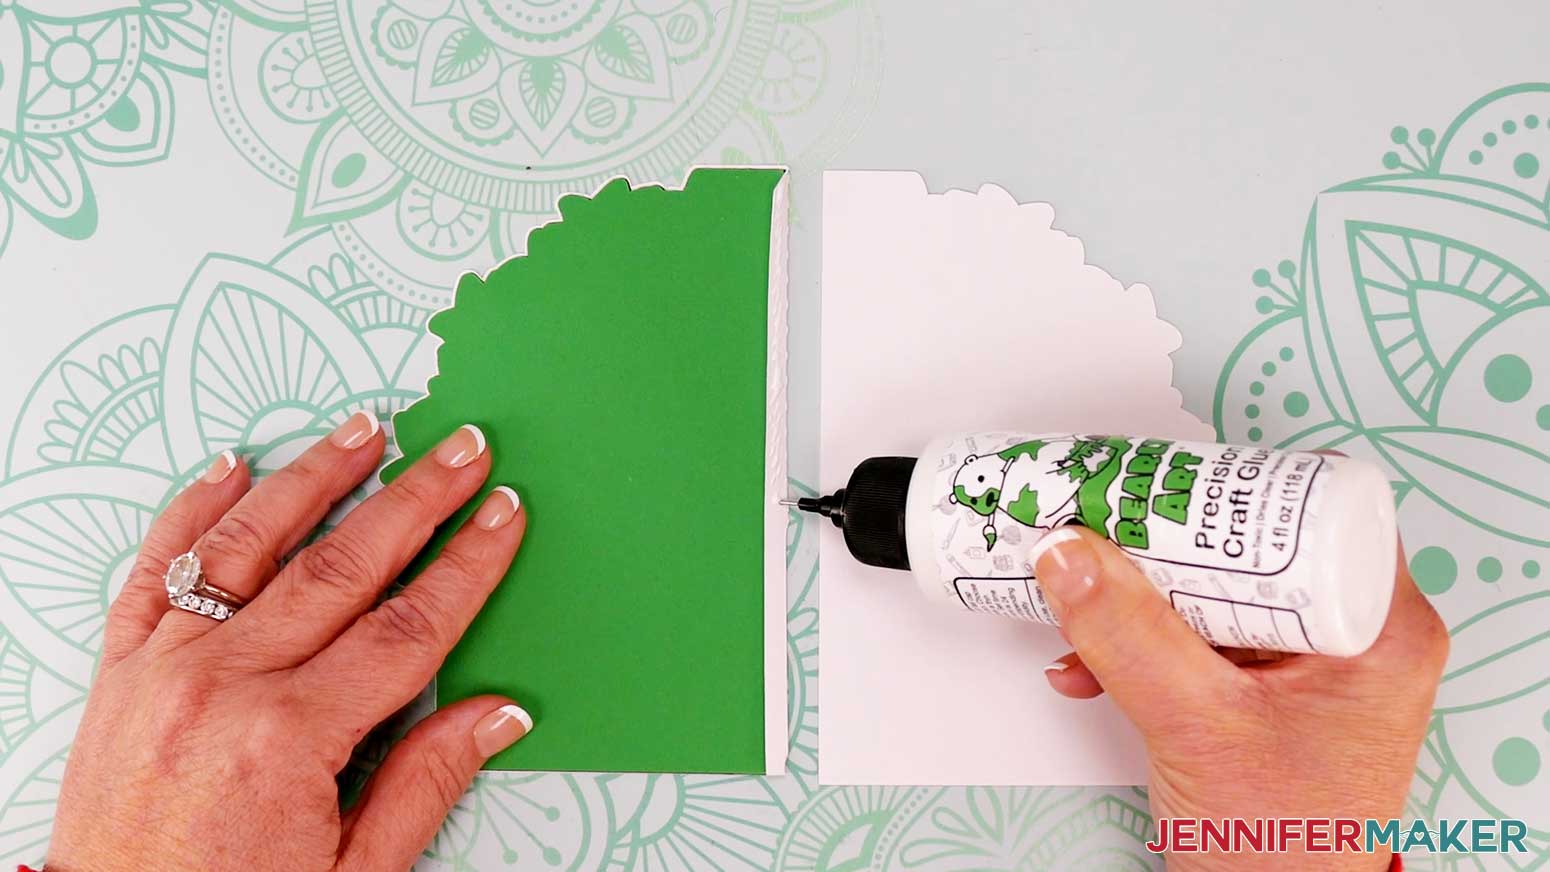 Add glue to the tab for the Joy-size tree shaped edge card in order to attach the front and back panels